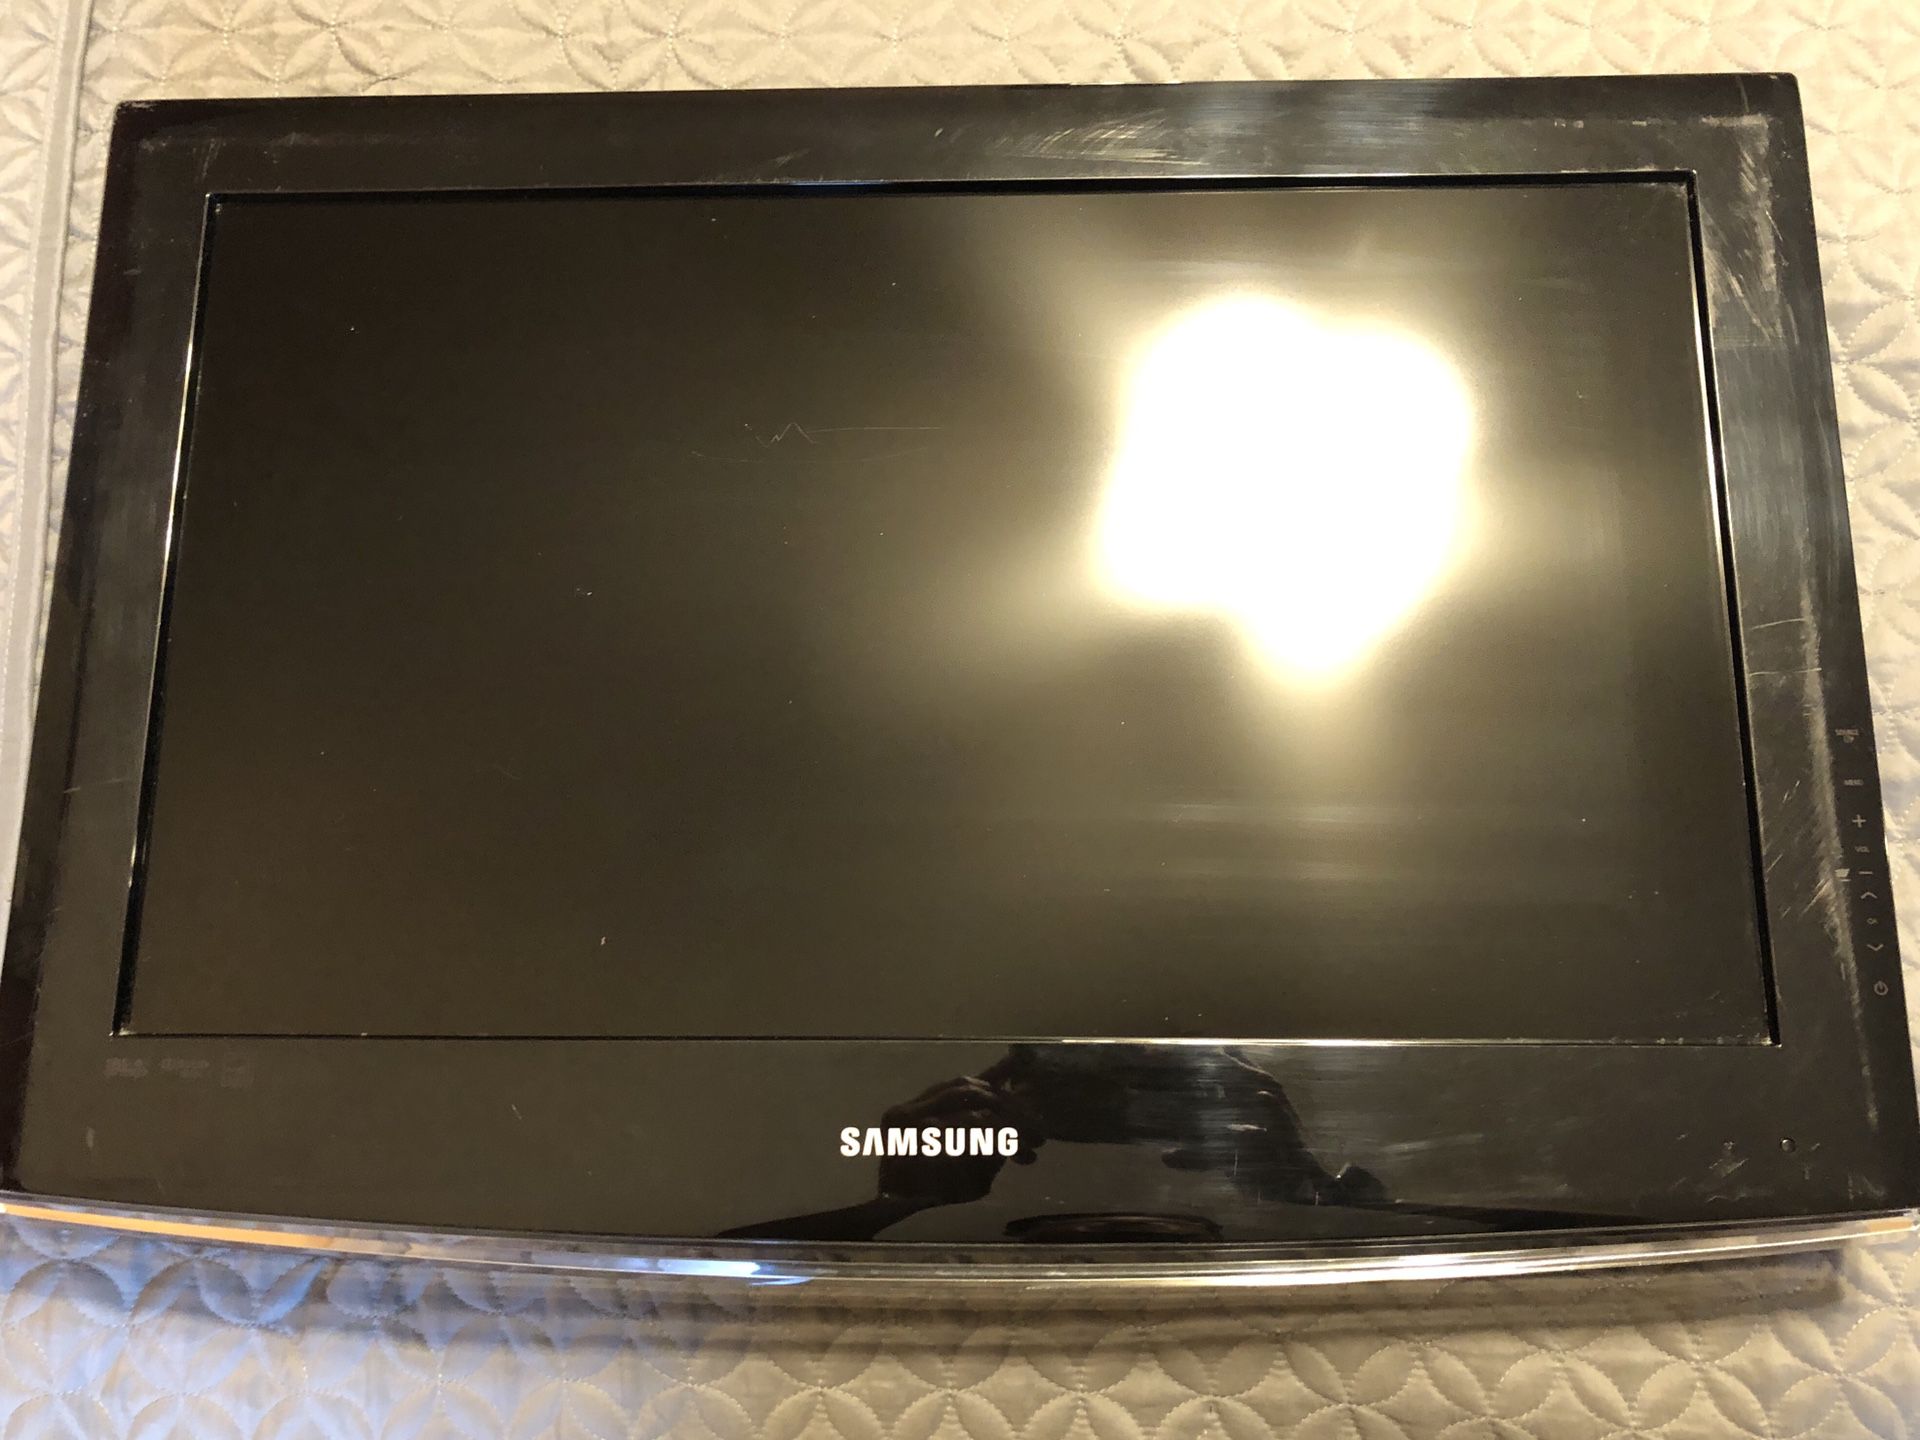 Samsung 26” Flatscreen Television, (No remote or base so can be hung on wall) all standard cable remotes such as Fios and Xfinity are compatible with